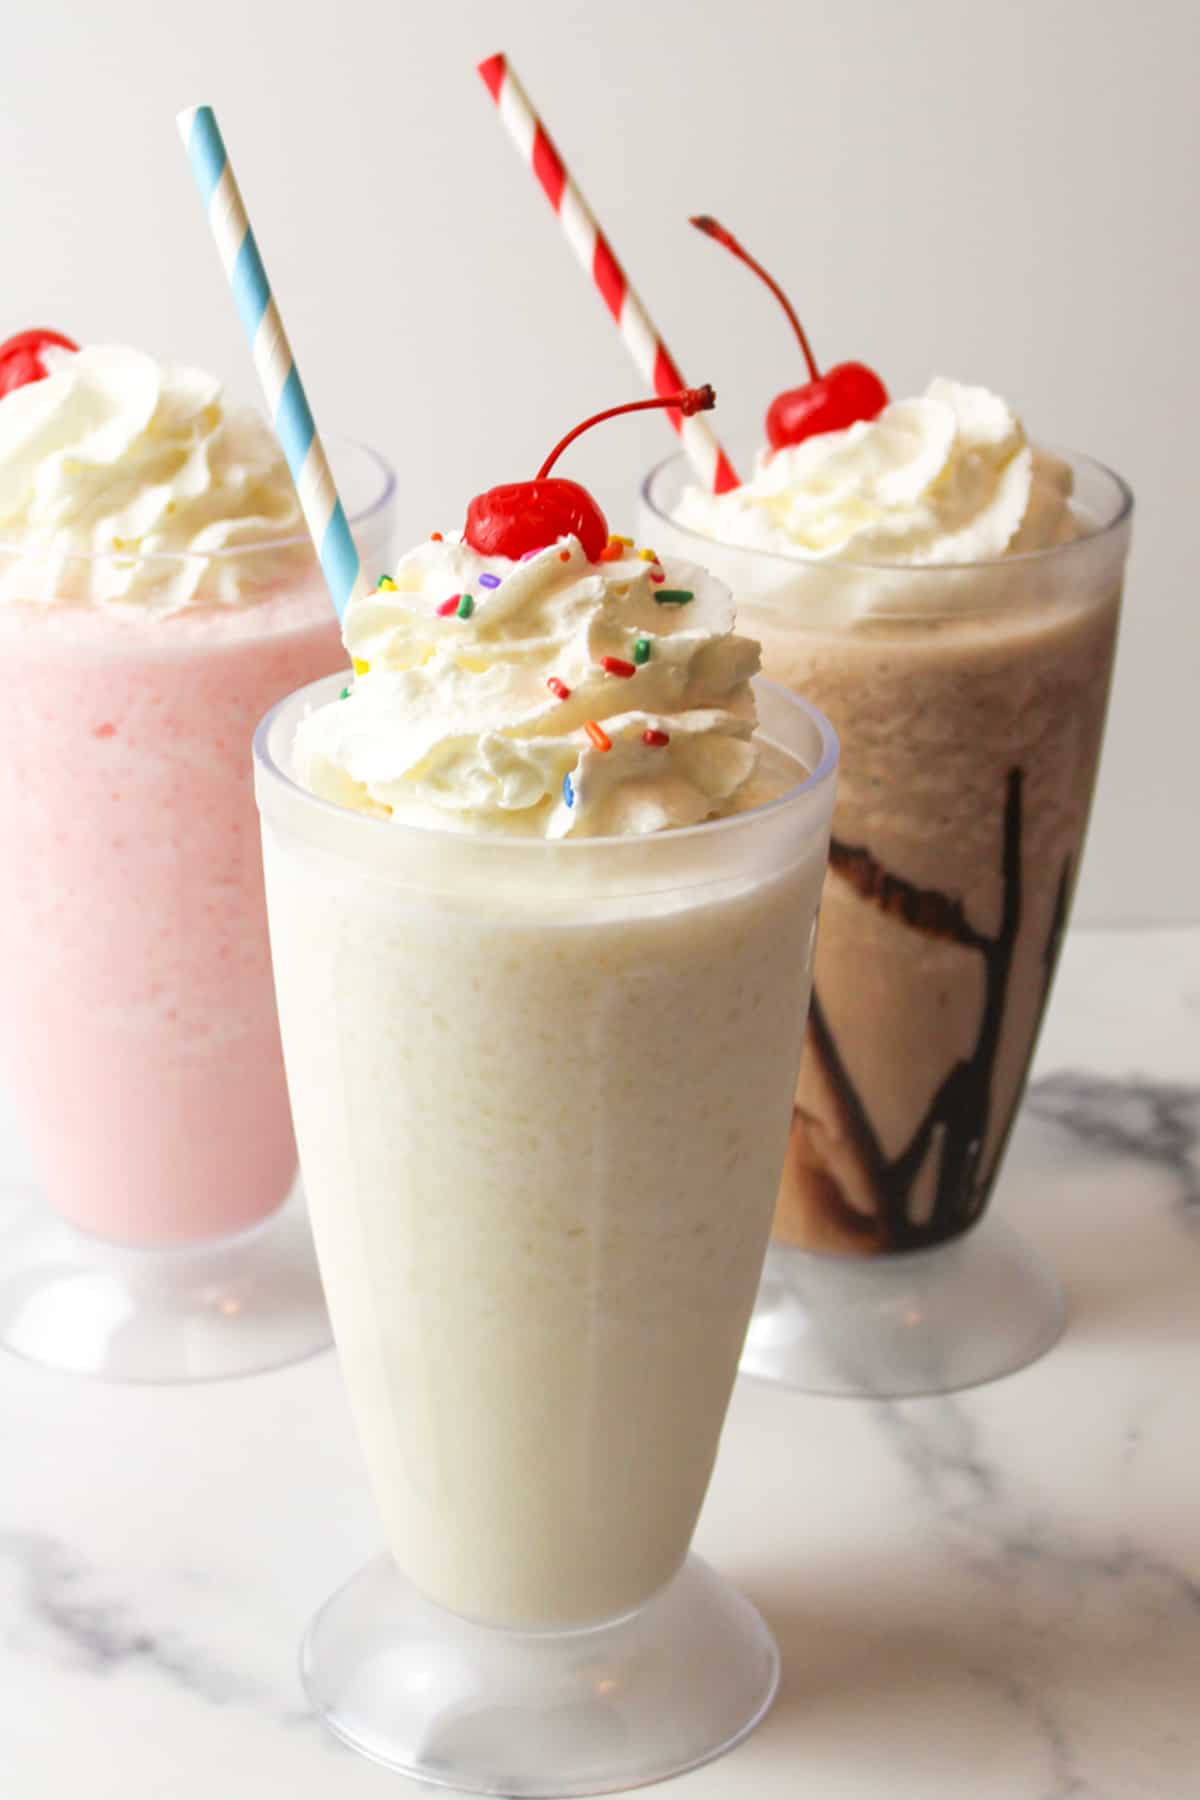 three milkshakes made without ice cream and topped with whipped cream and cherries and given a striped straw